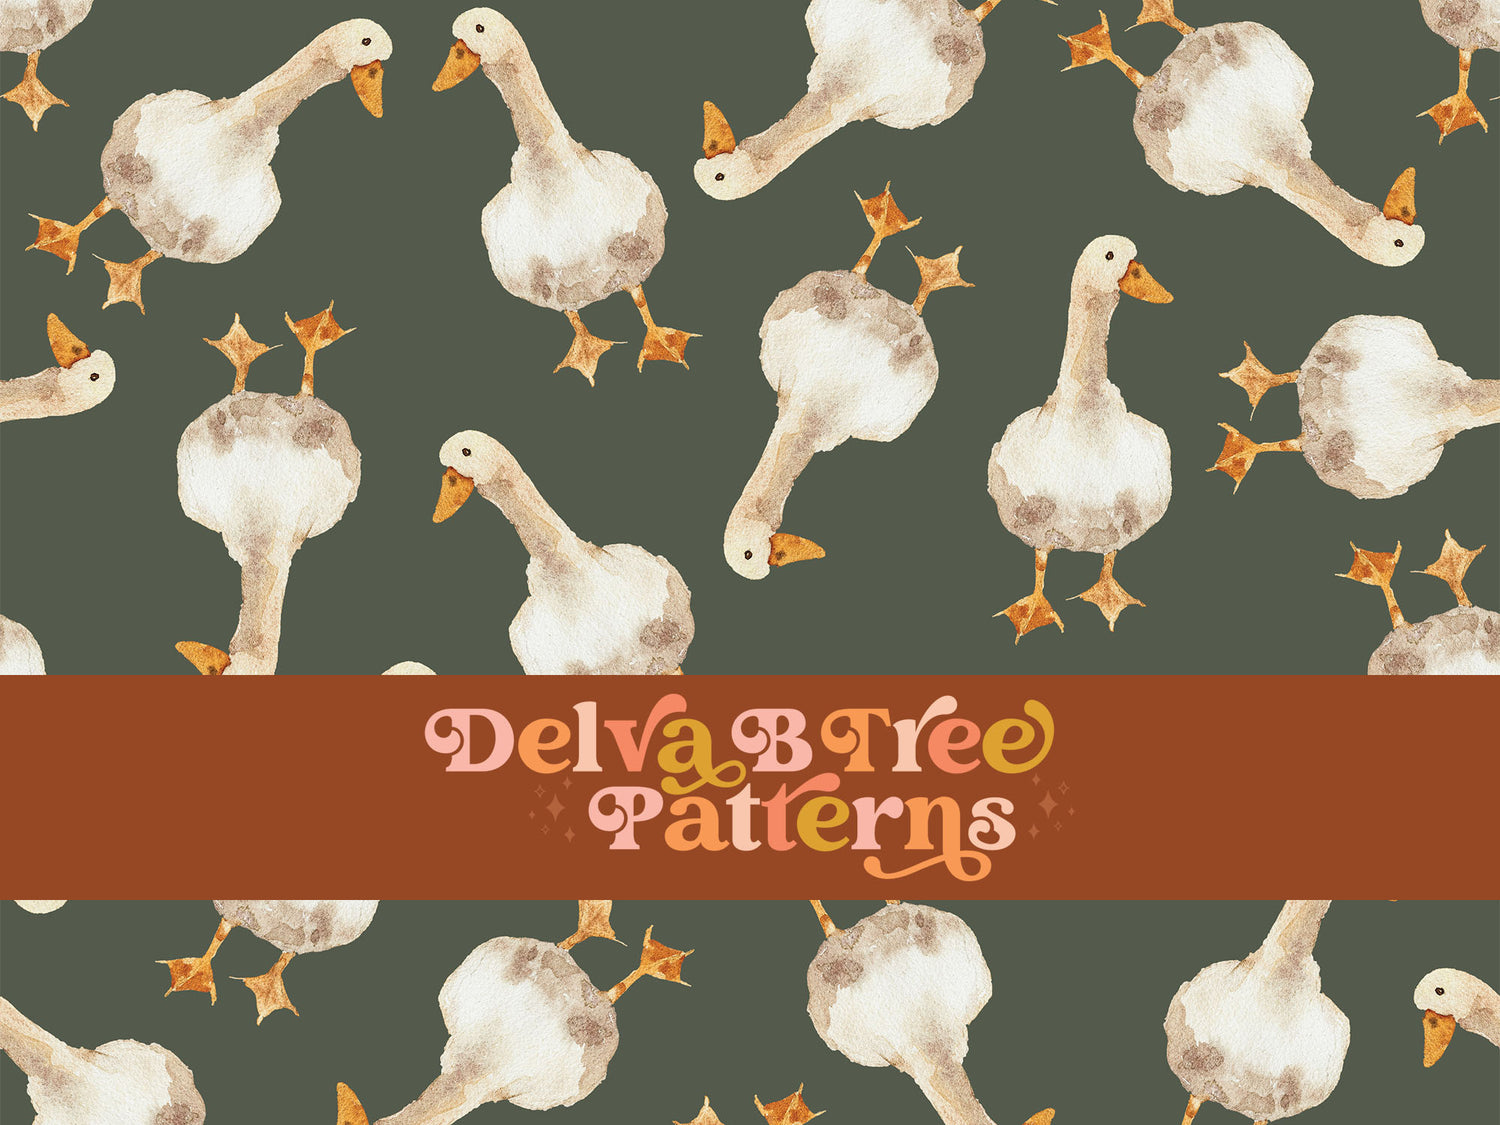 Watercolor geese tossed on a thyme green background seamless file for fabric printing. Gender Neutral retro looking goose repeat pattern for textiles, polymailers, baby boy lovey blankets, nursery crib bedding, kids clothing, girls hair accessories, home decor accents, pet products.